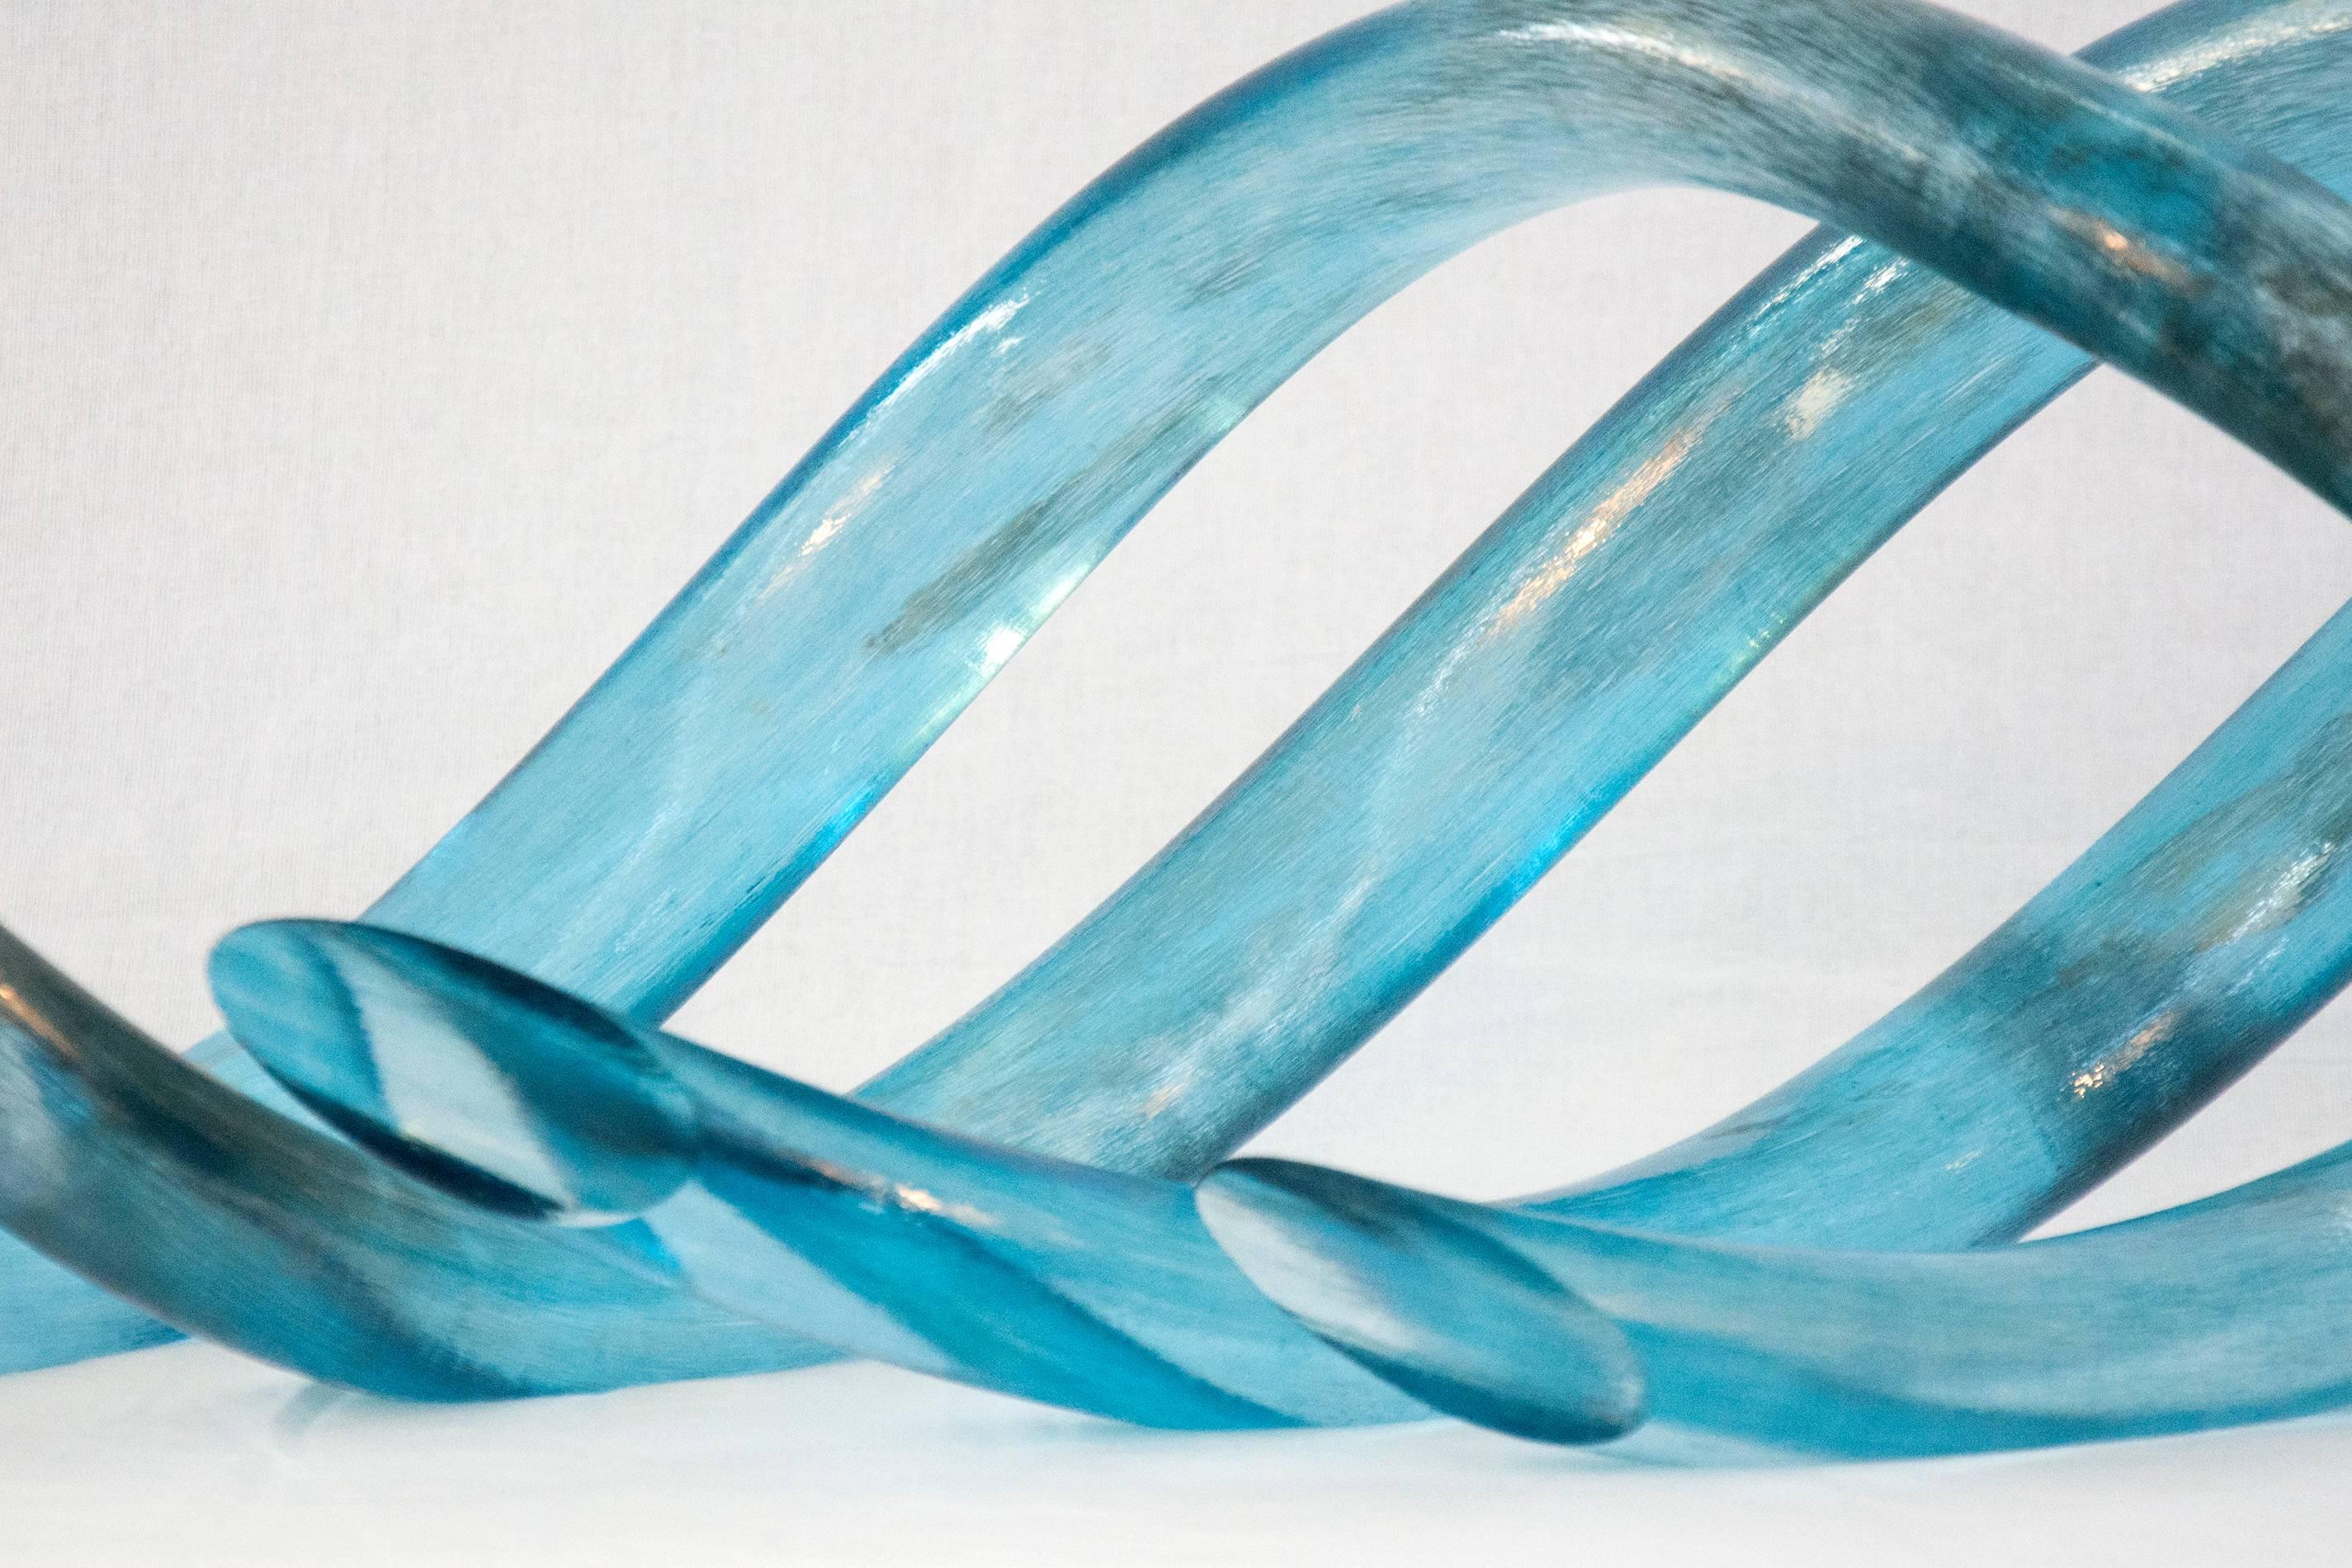 Blue Wave - flowing, glass, translucent, blue, waves, tabletop sculpture - Abstract Sculpture by John Paul Robinson